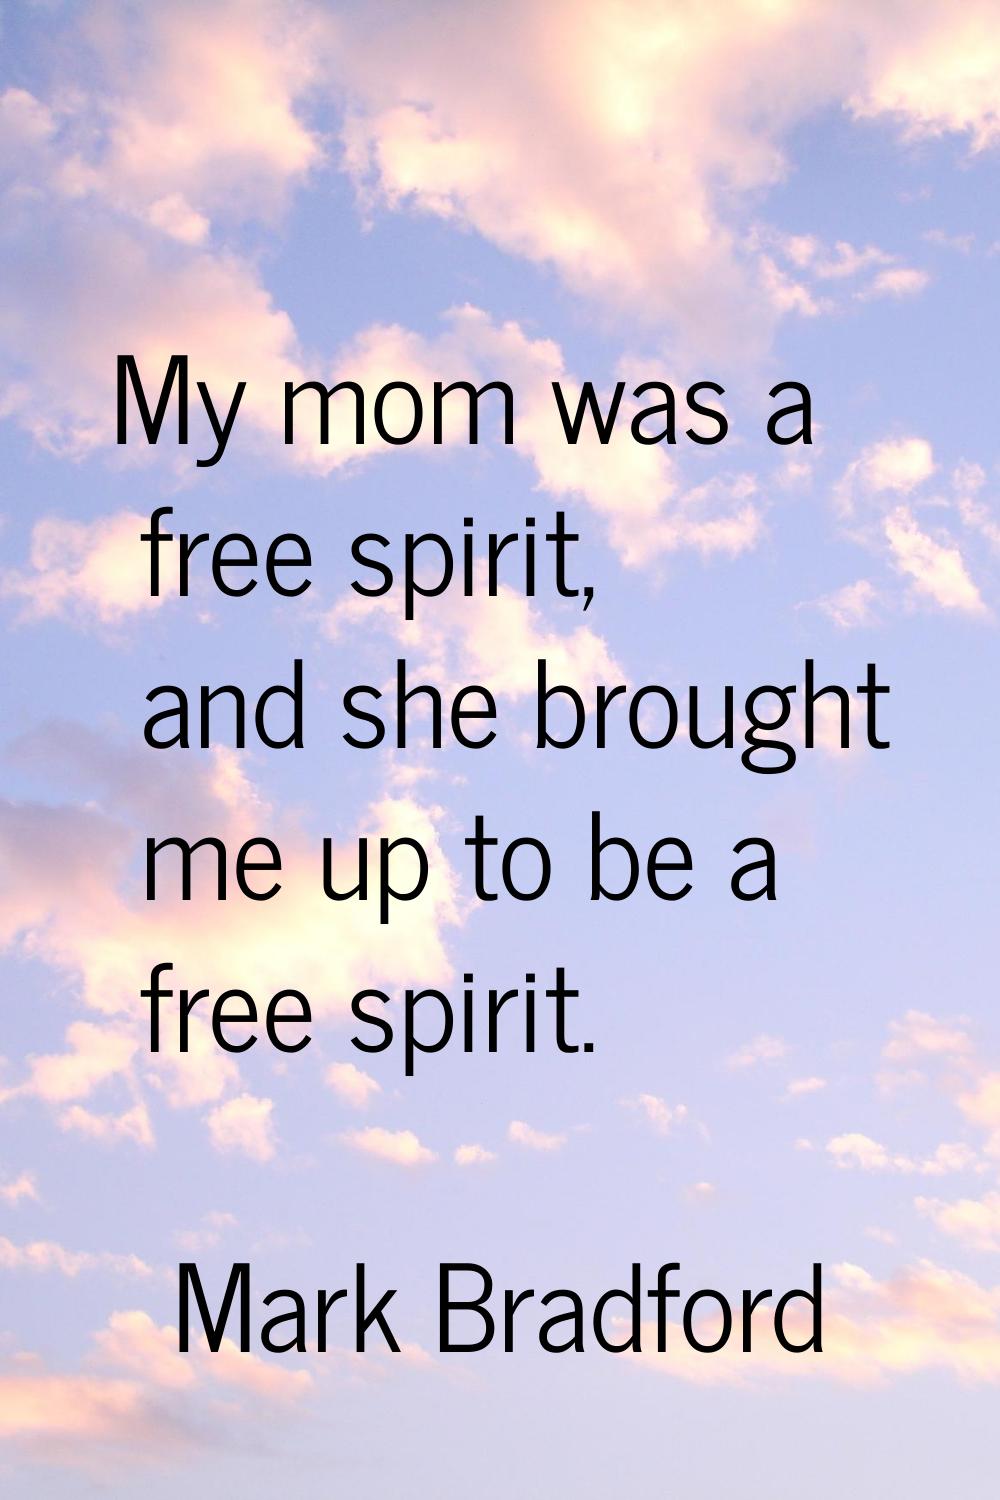 My mom was a free spirit, and she brought me up to be a free spirit.